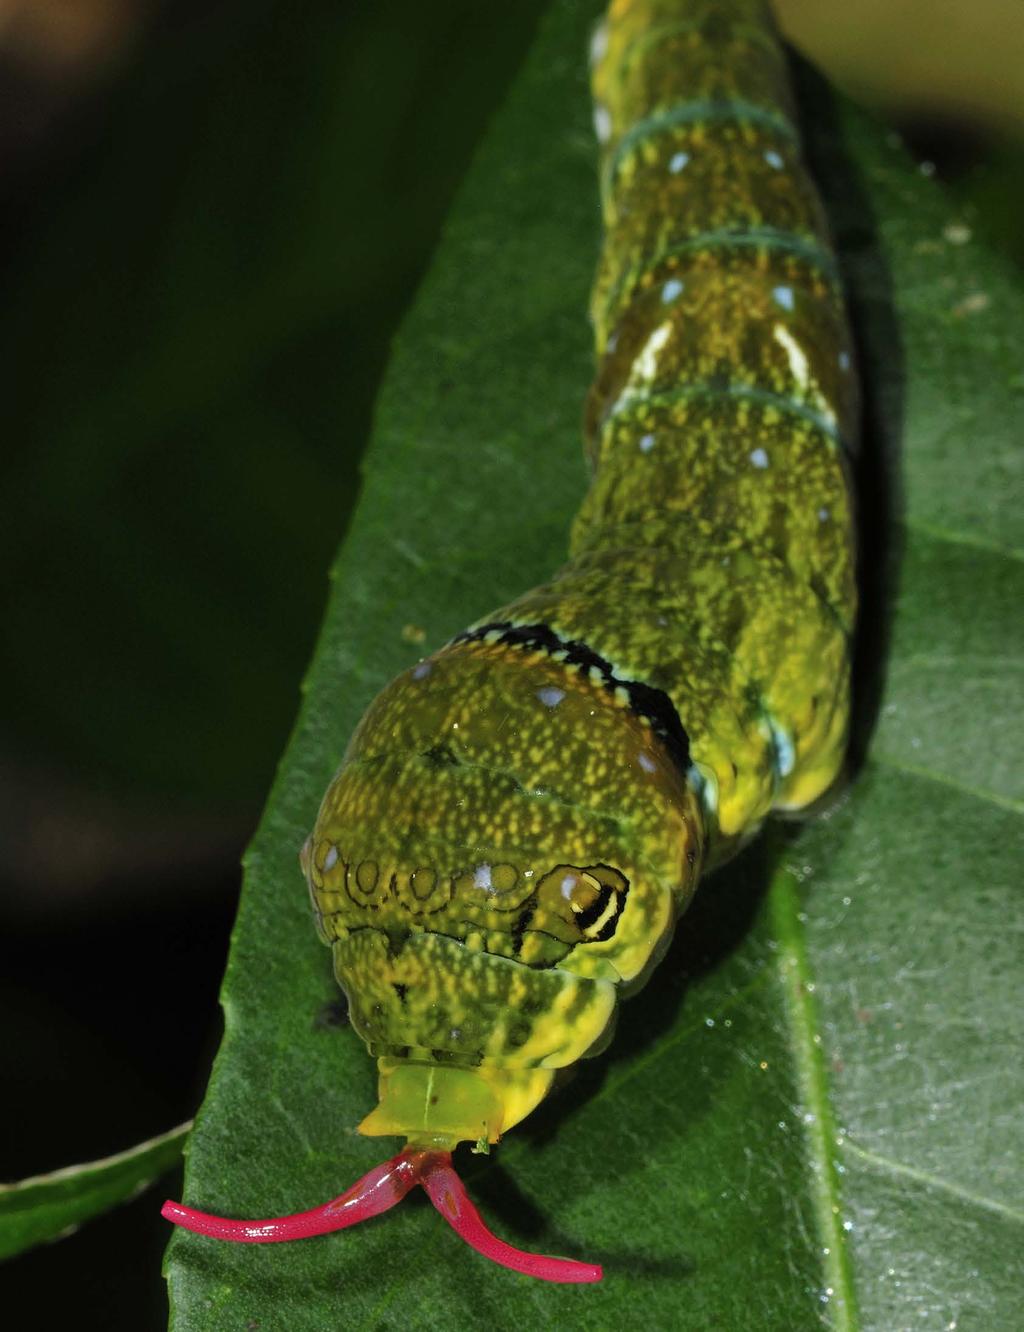 Left, a lateroventral view of a caterpillar of